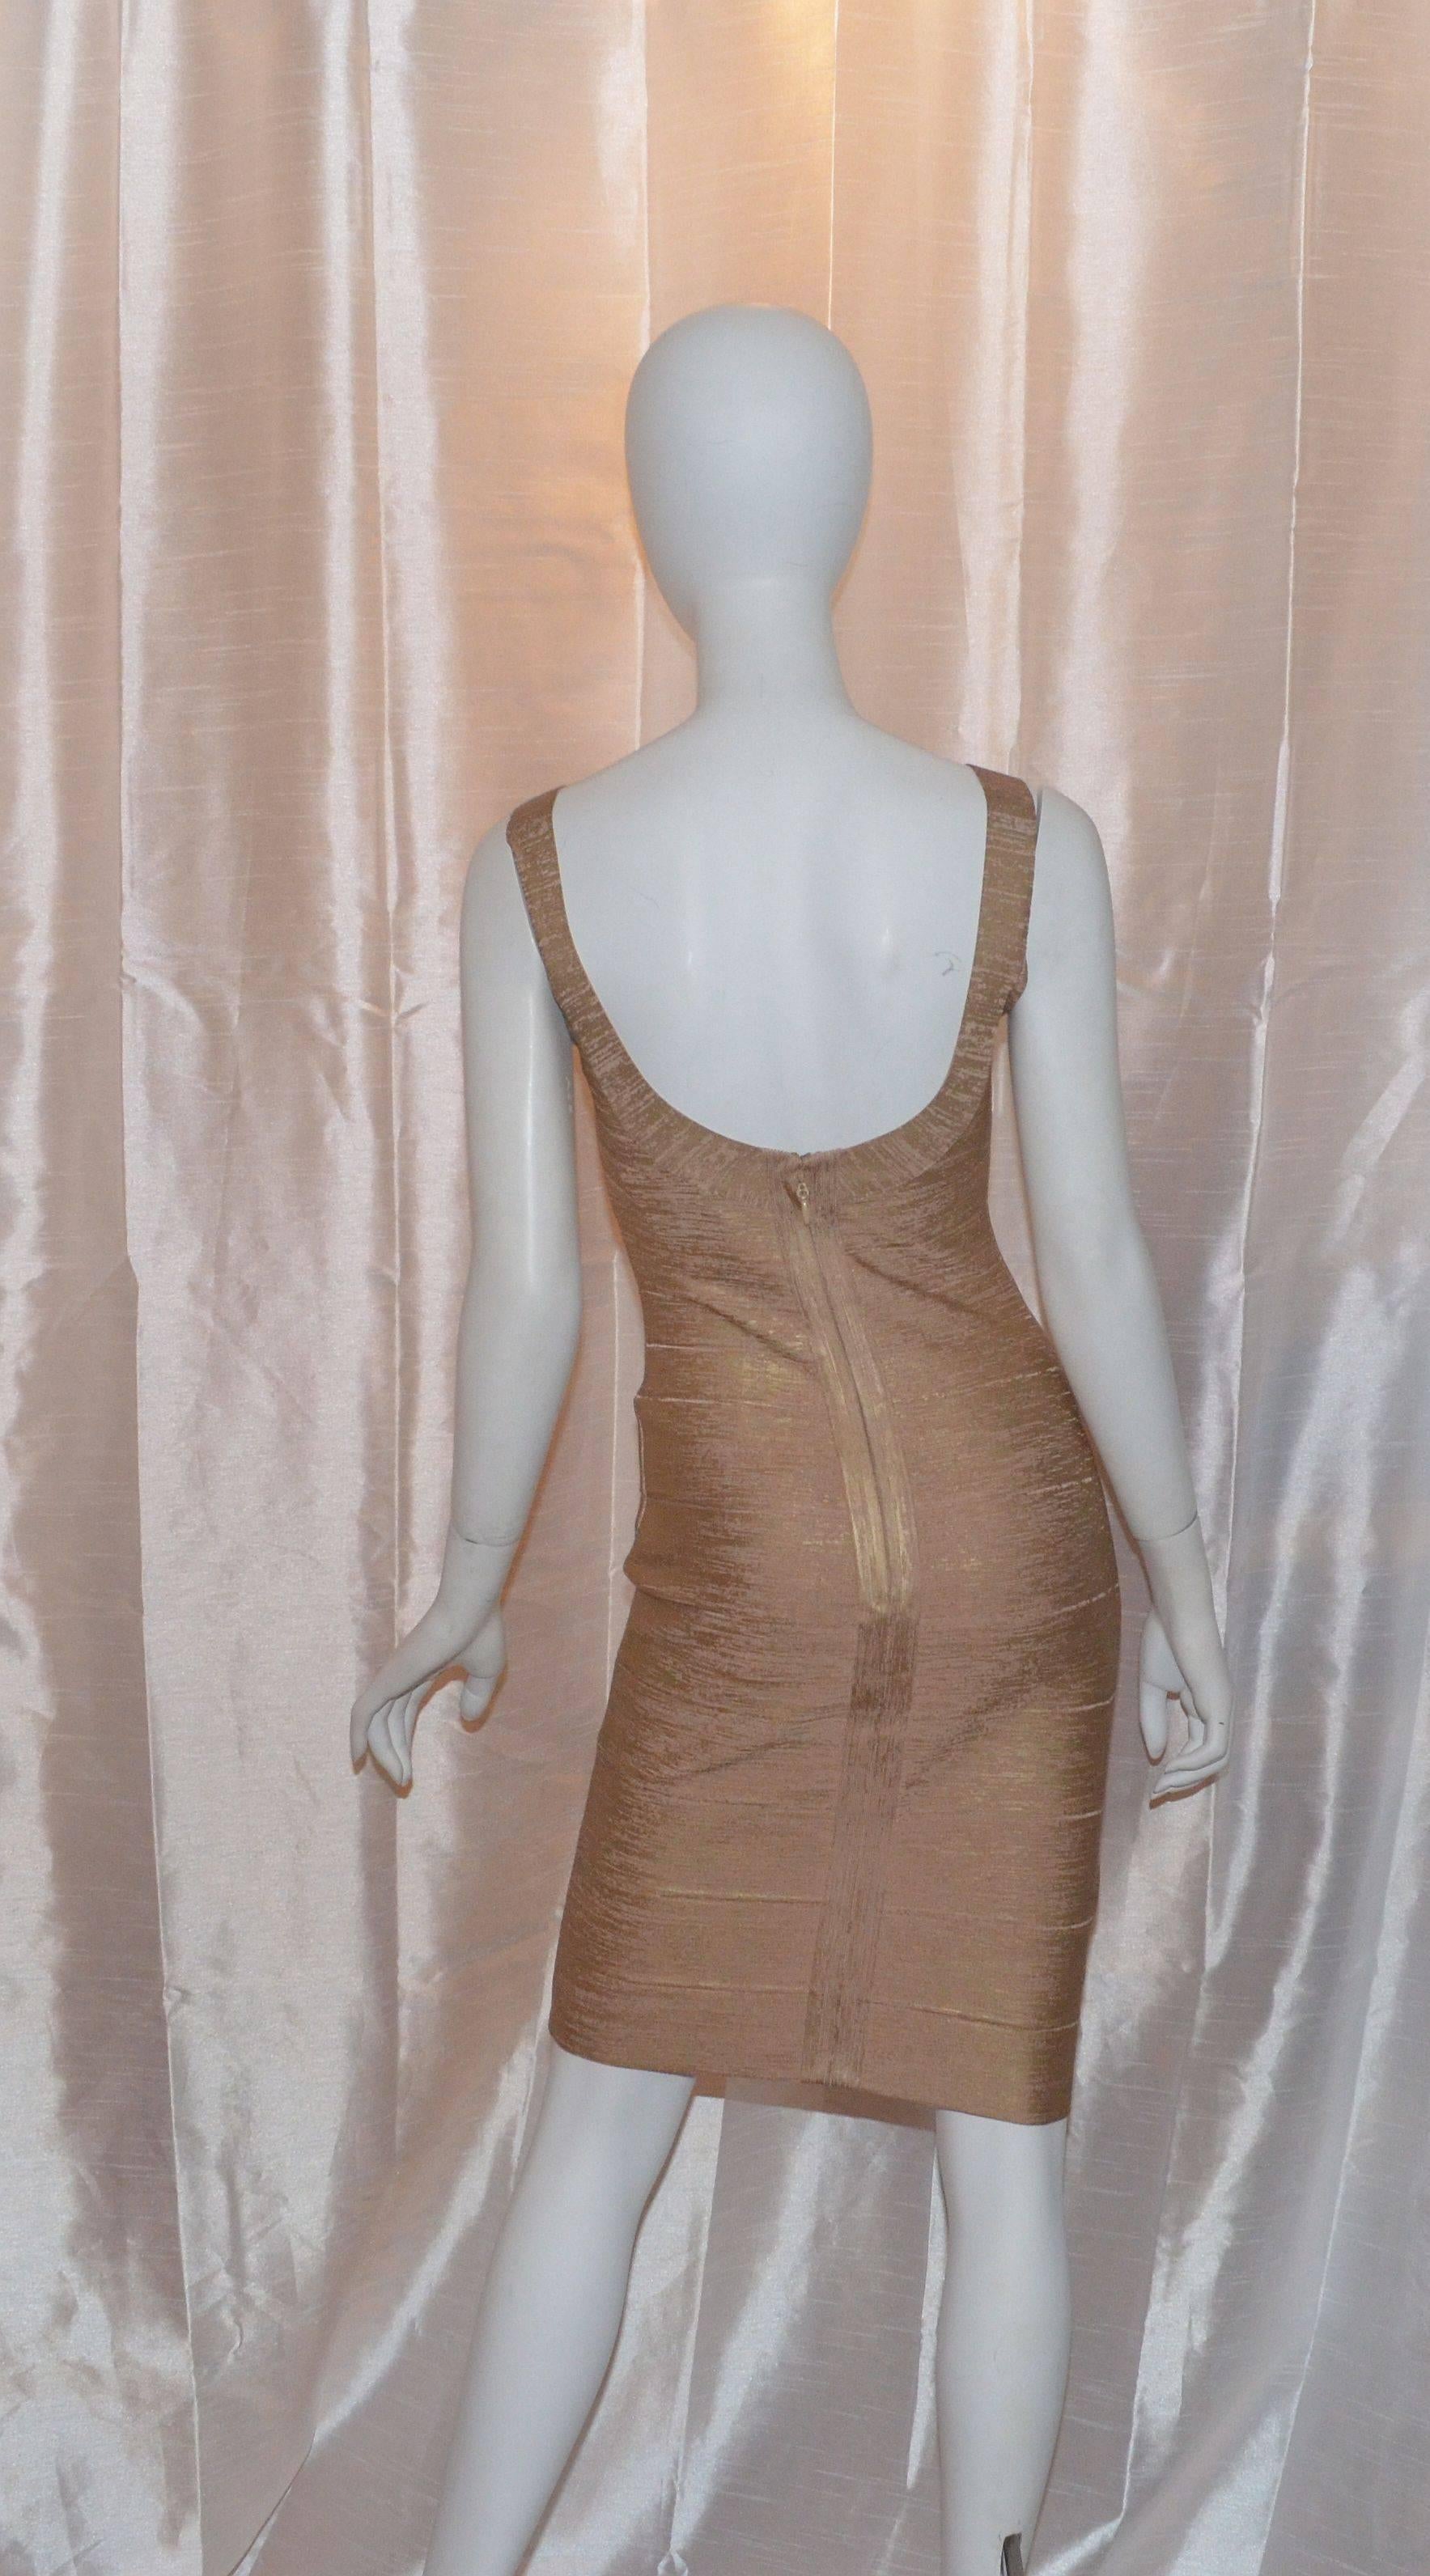 Herve Leger bandage dress features a scoop neckline and a slightly open back silhouette. Dress has back zipper and hook-and-eye closure. Size S. Excellent condition.

Measurements:
Bust - 28''
Waist - 24''
Hips - 30''
Length - 36''